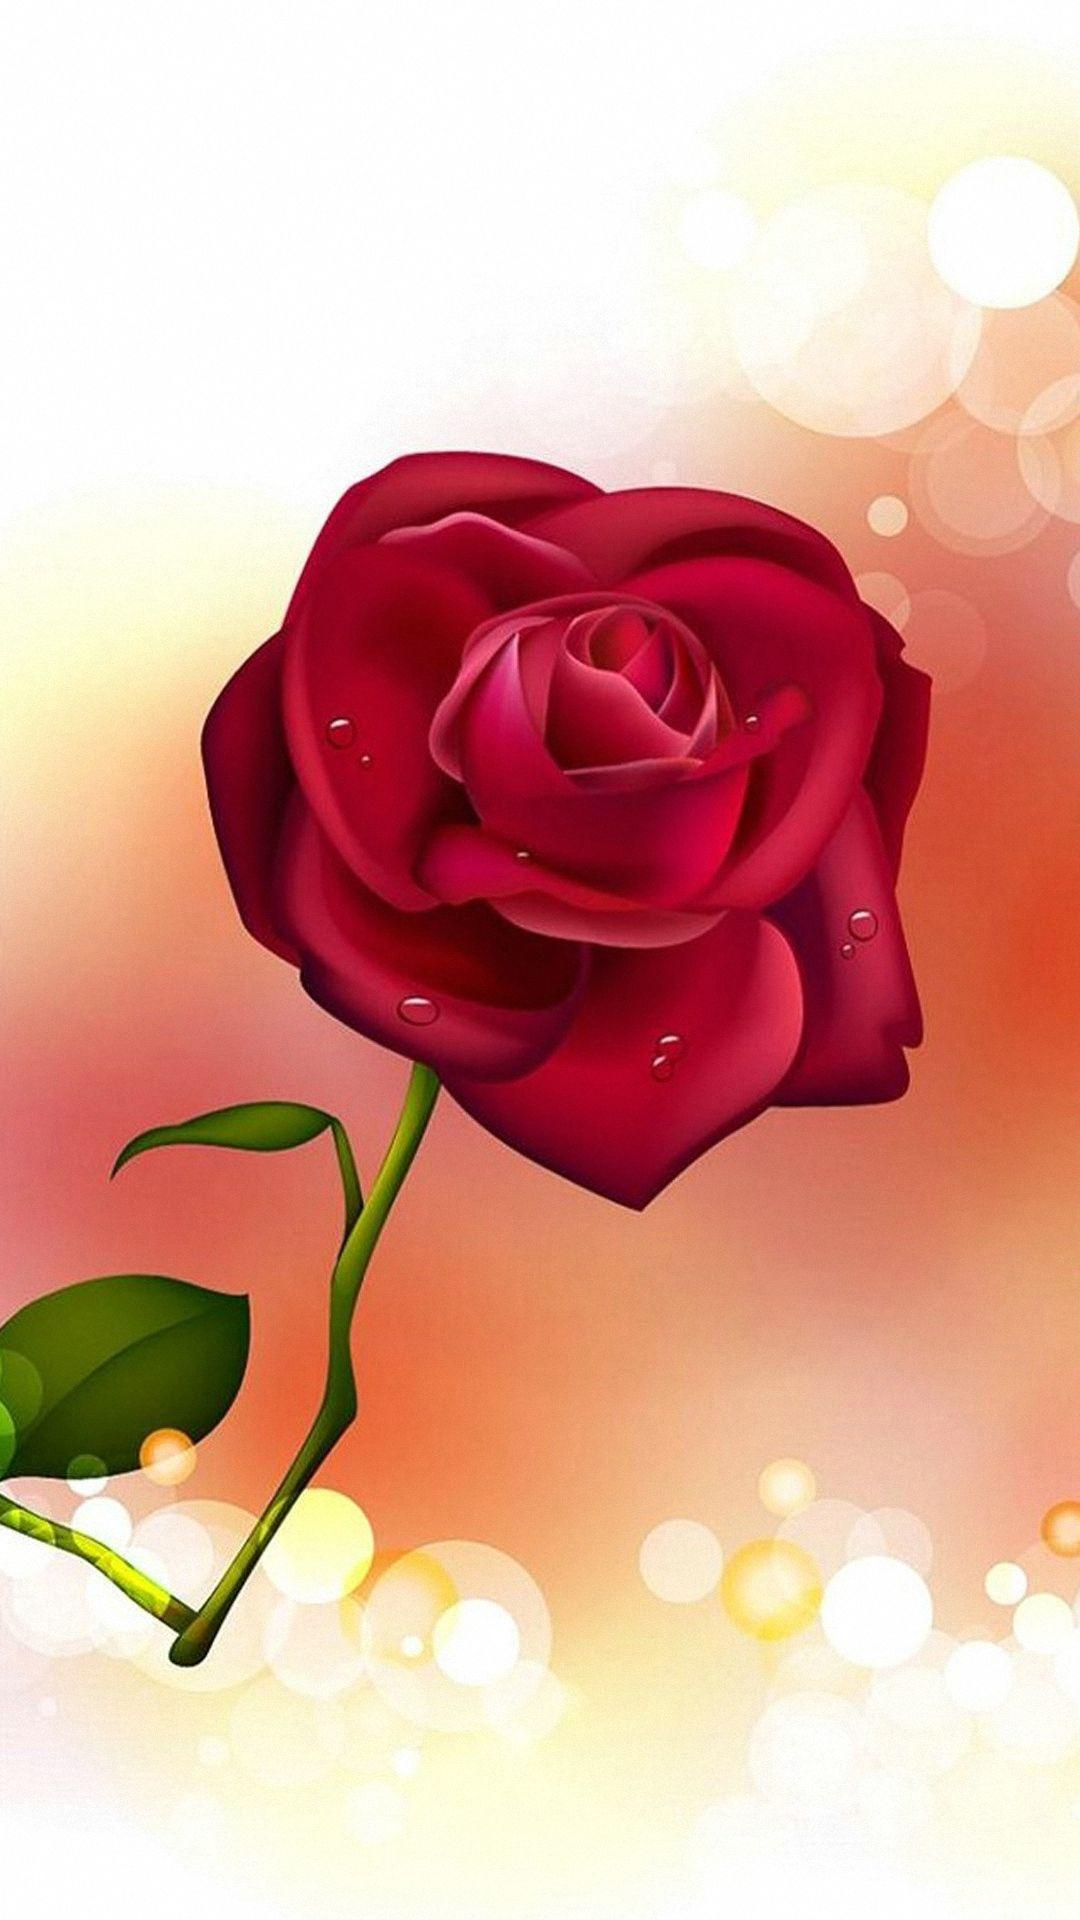 Mobile Rose Wallpapers - Top Free Mobile Rose Backgrounds - WallpaperAccess